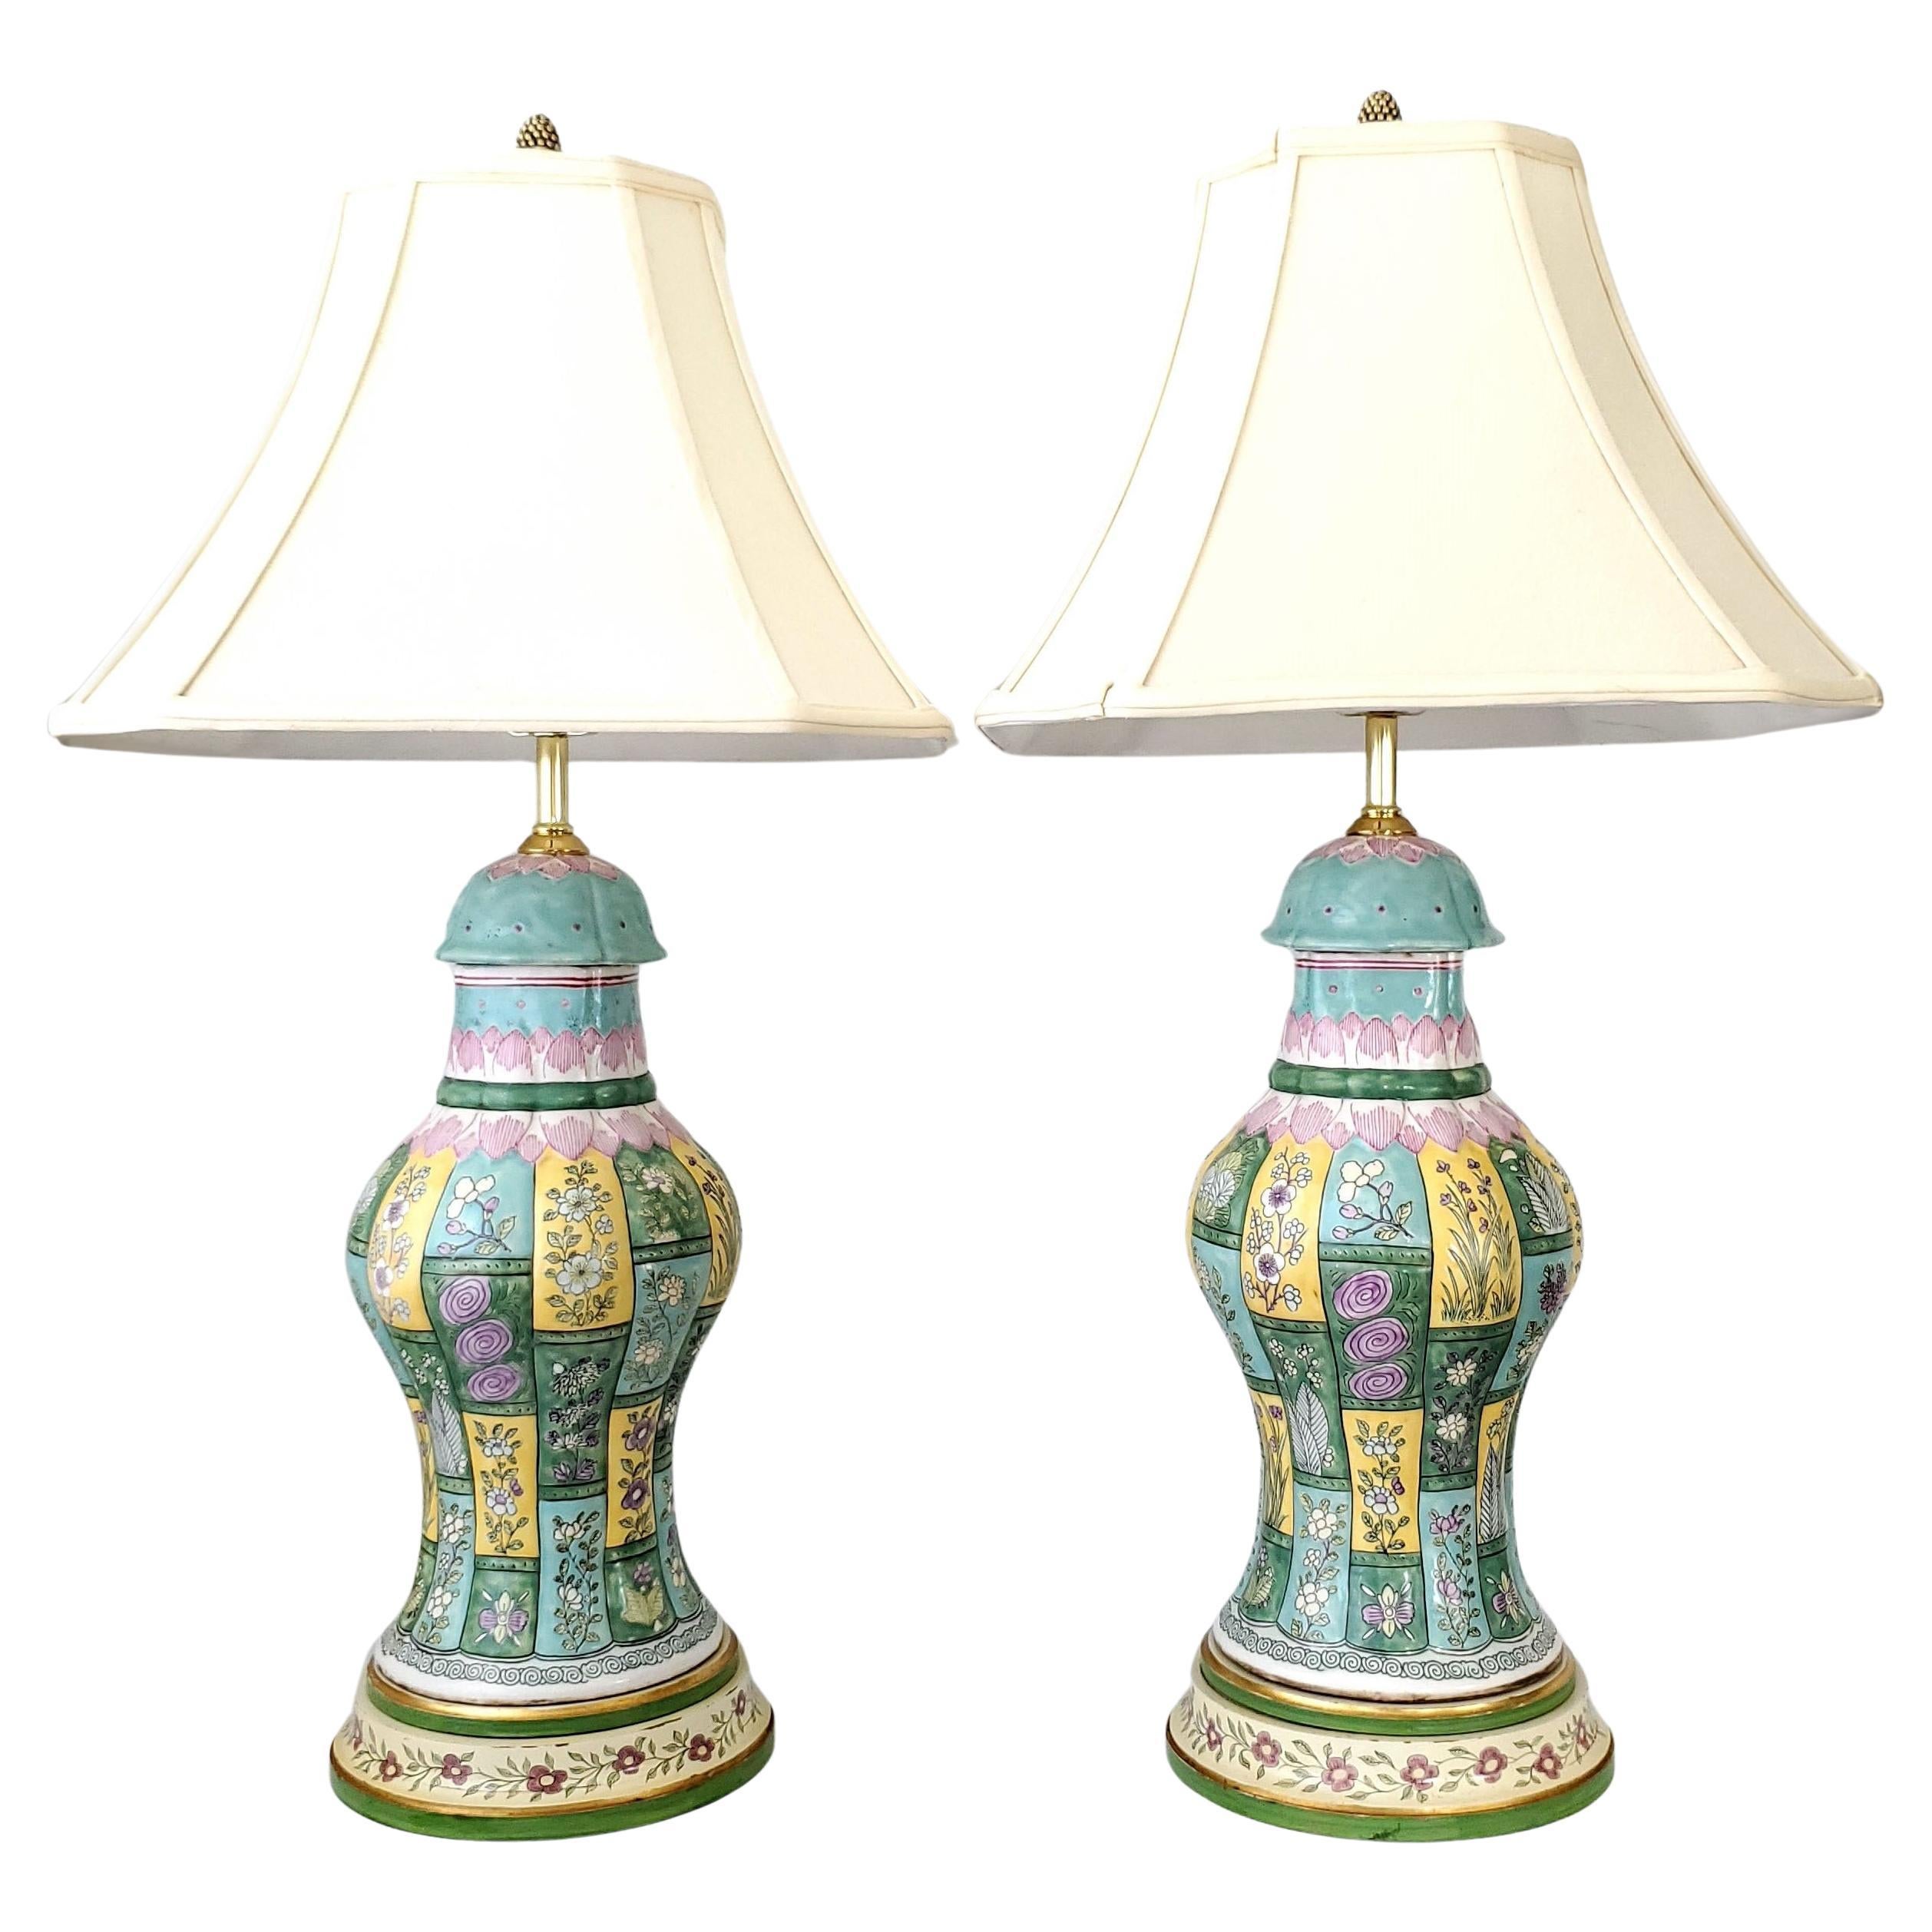 Pair of Vintage Chinese Porcelain Baluster Table Lamps with Linen & Silk Shades